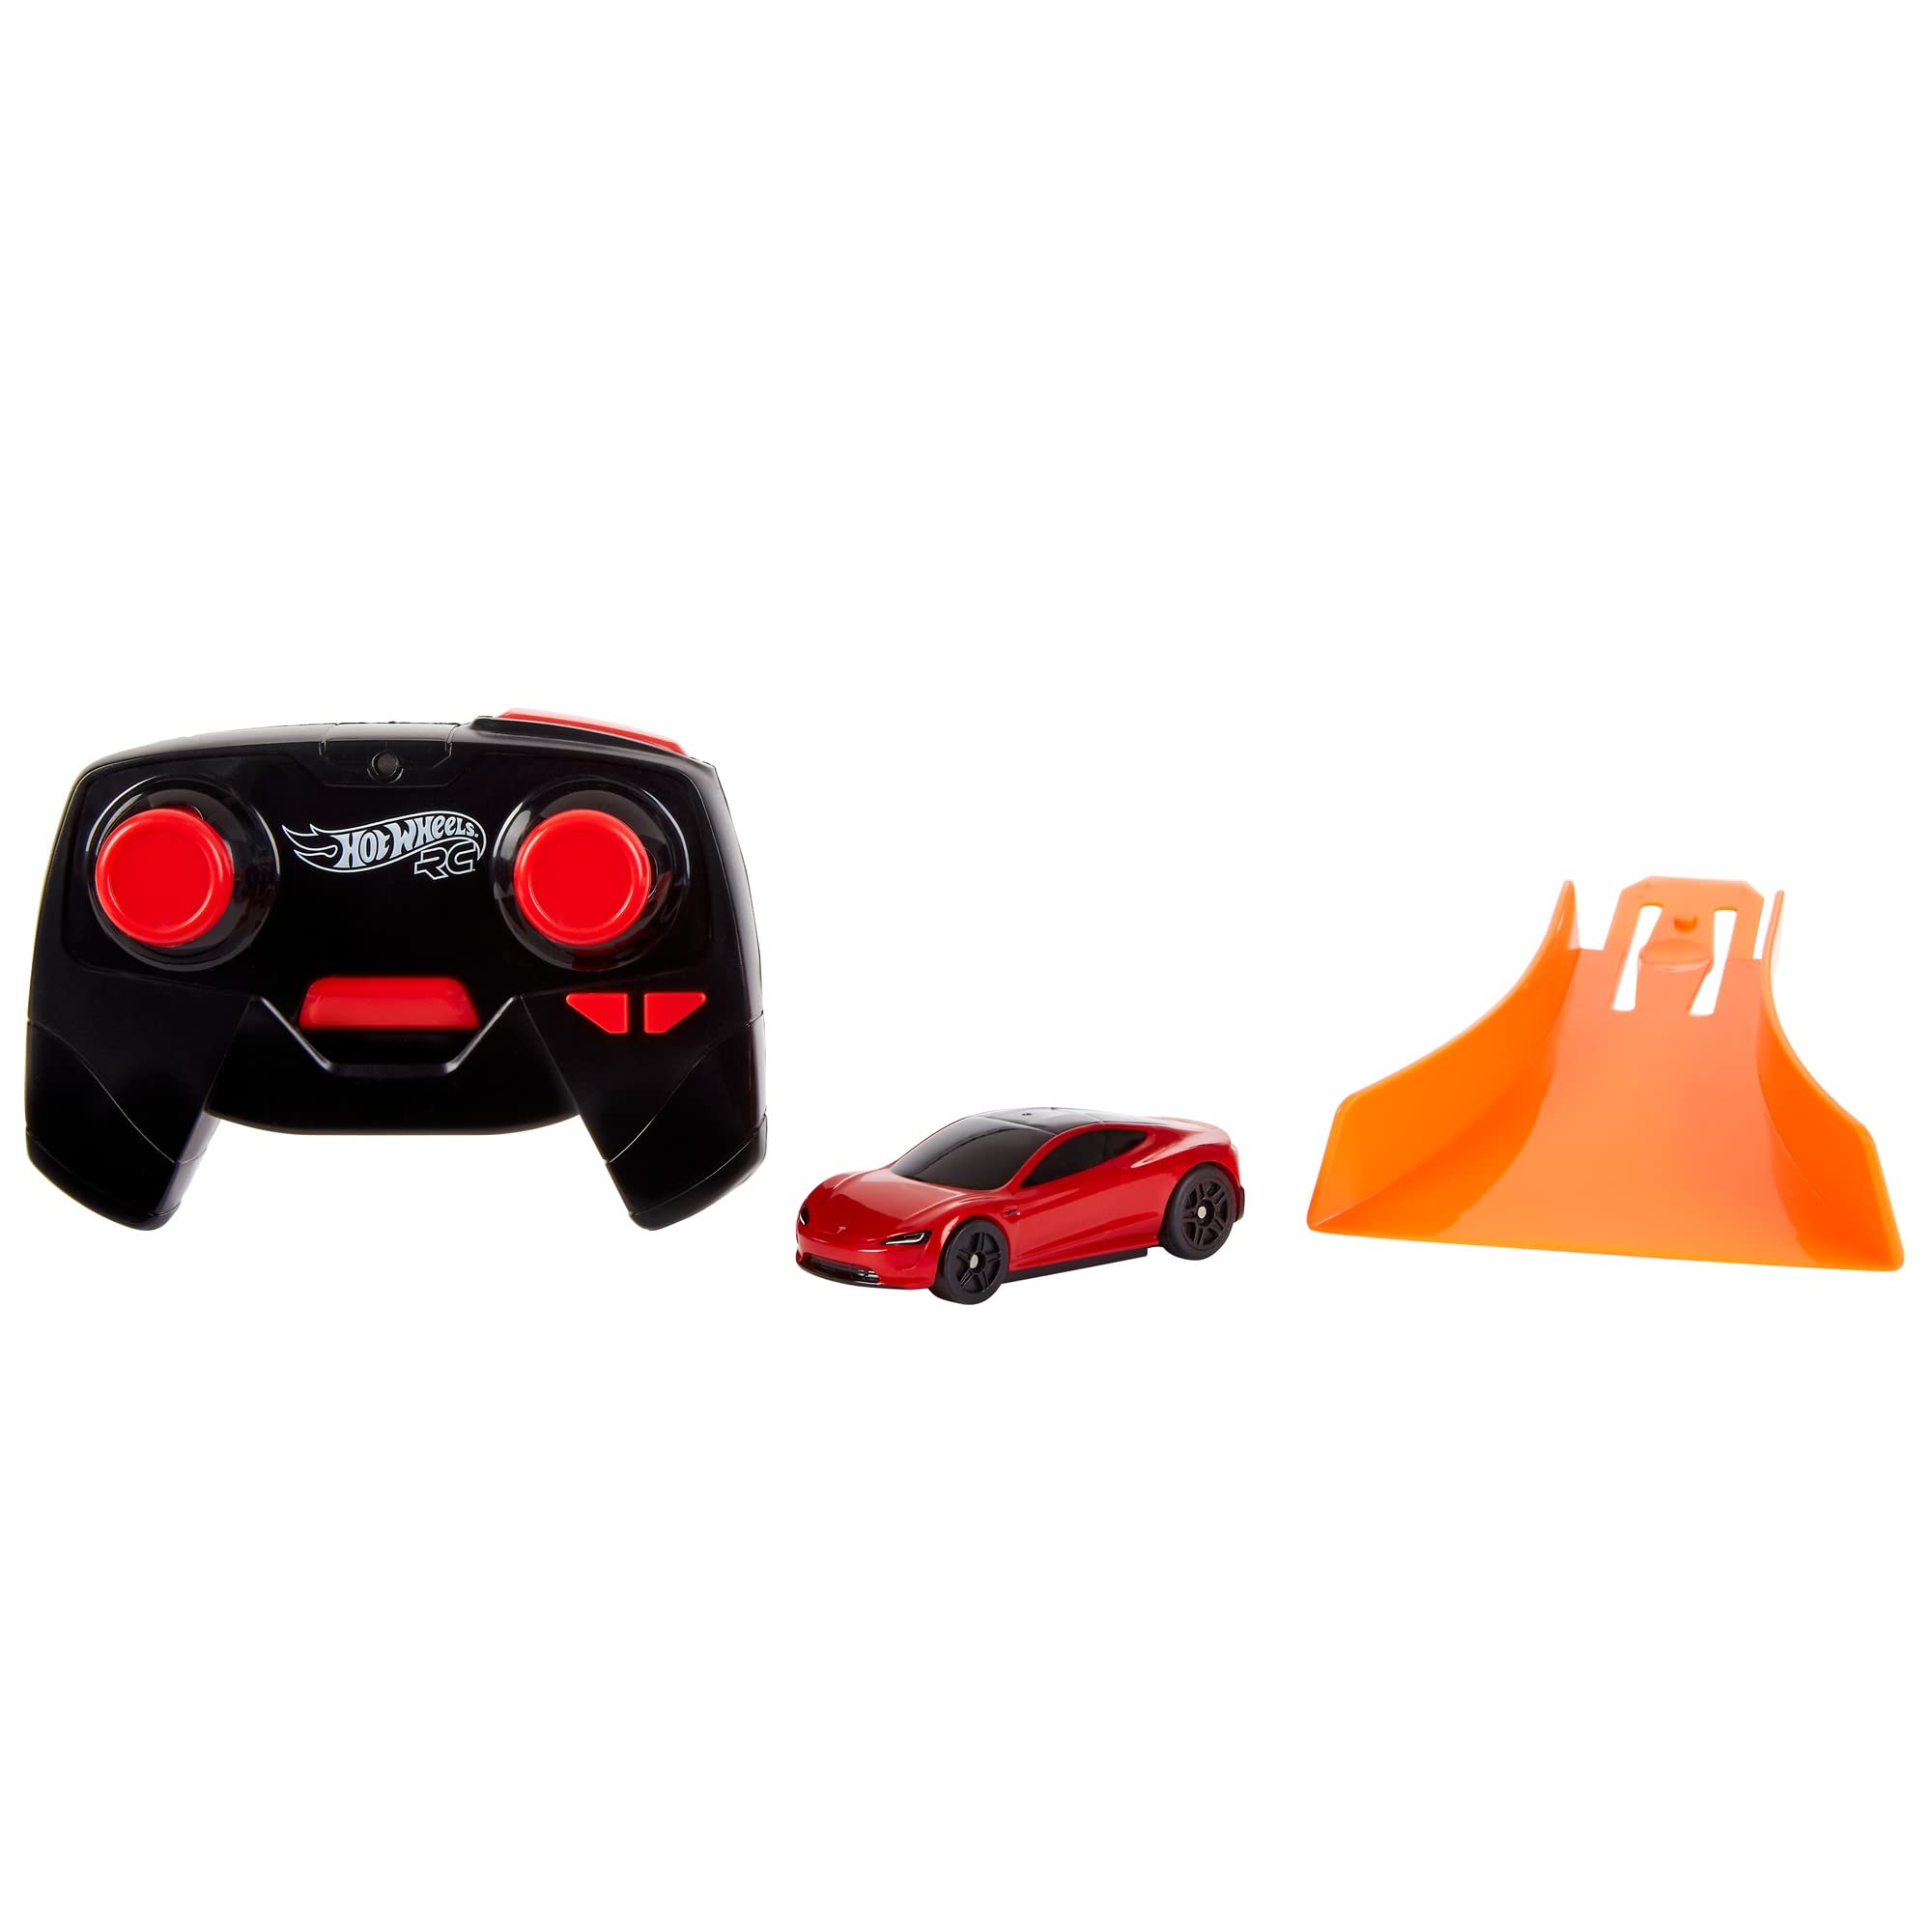 Hot Wheels Rc Tesla Roadster in 1:64 Scale, Remote-Control Toy Car with Controller & Track Adapter, Works On & Off Track